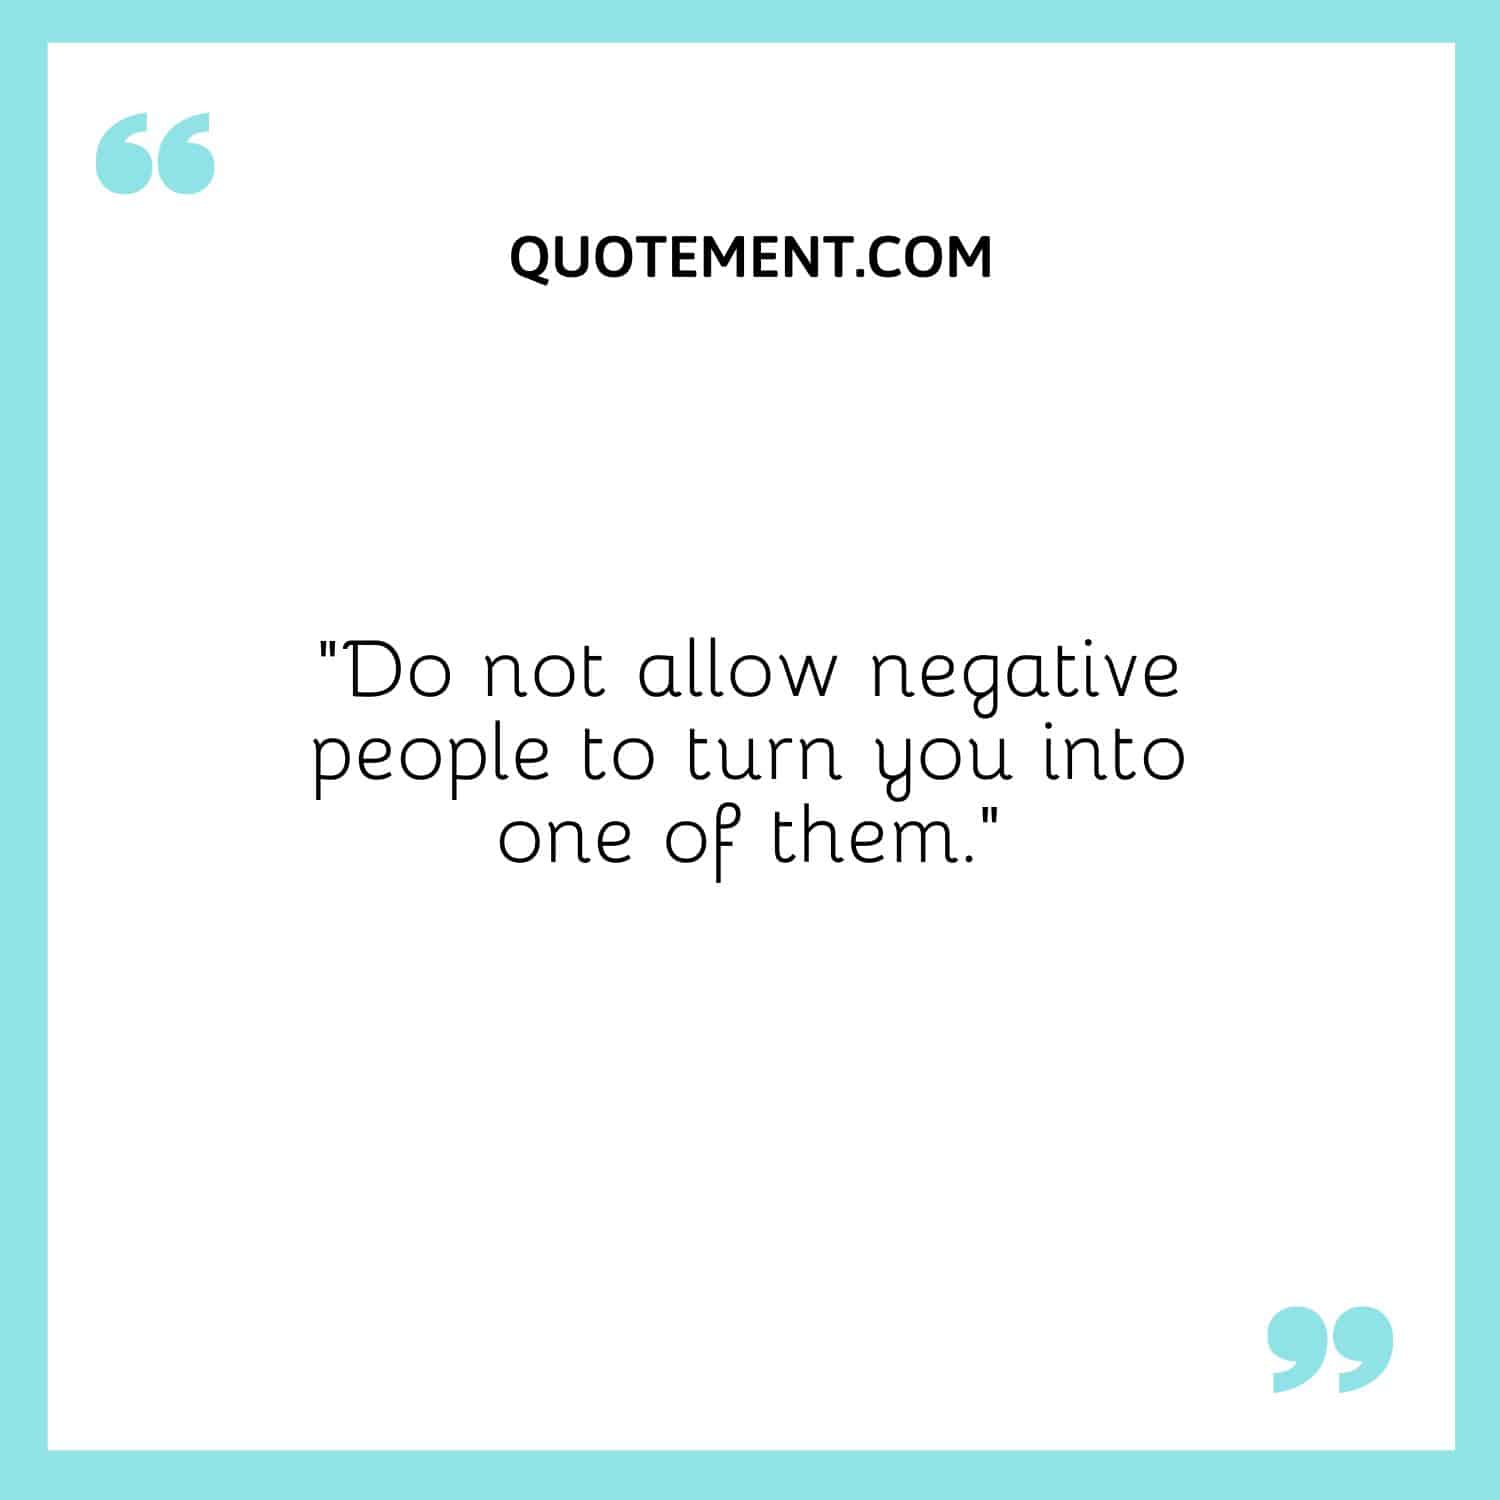 “Do not allow negative people to turn you into one of them.”